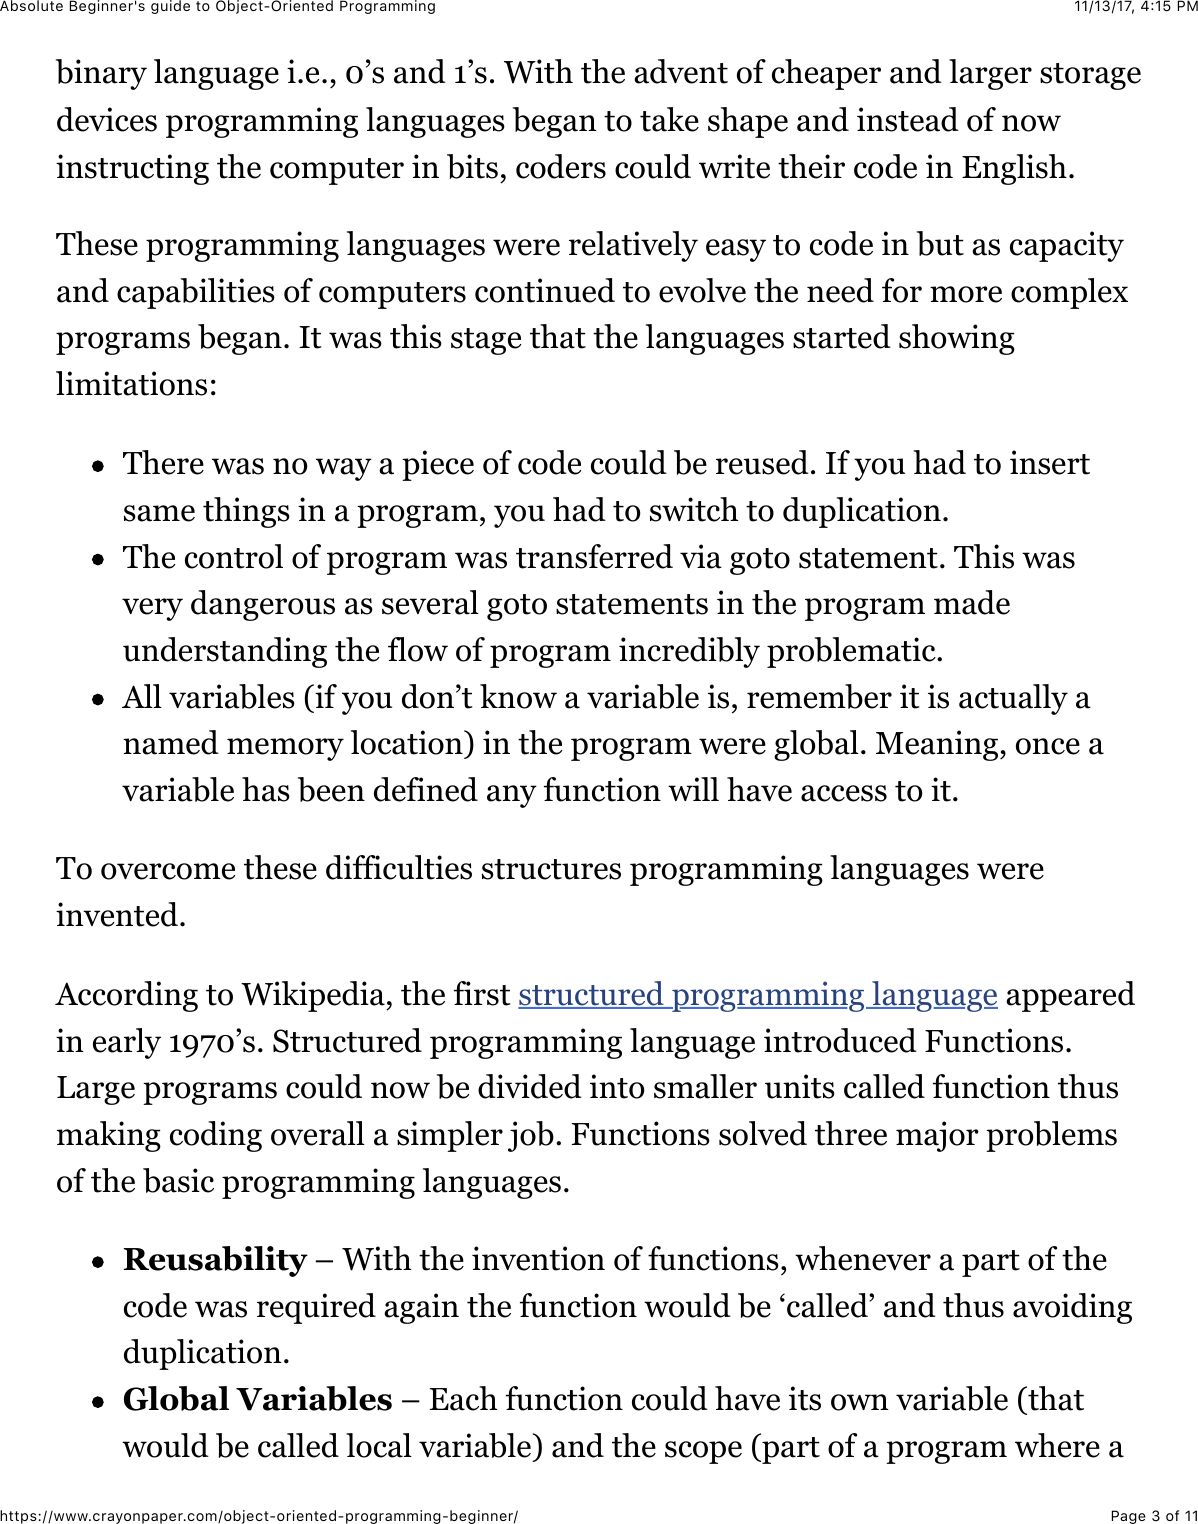 Page 3 of 11 - Absolute Beginner's Guide To Object-Oriented Programming